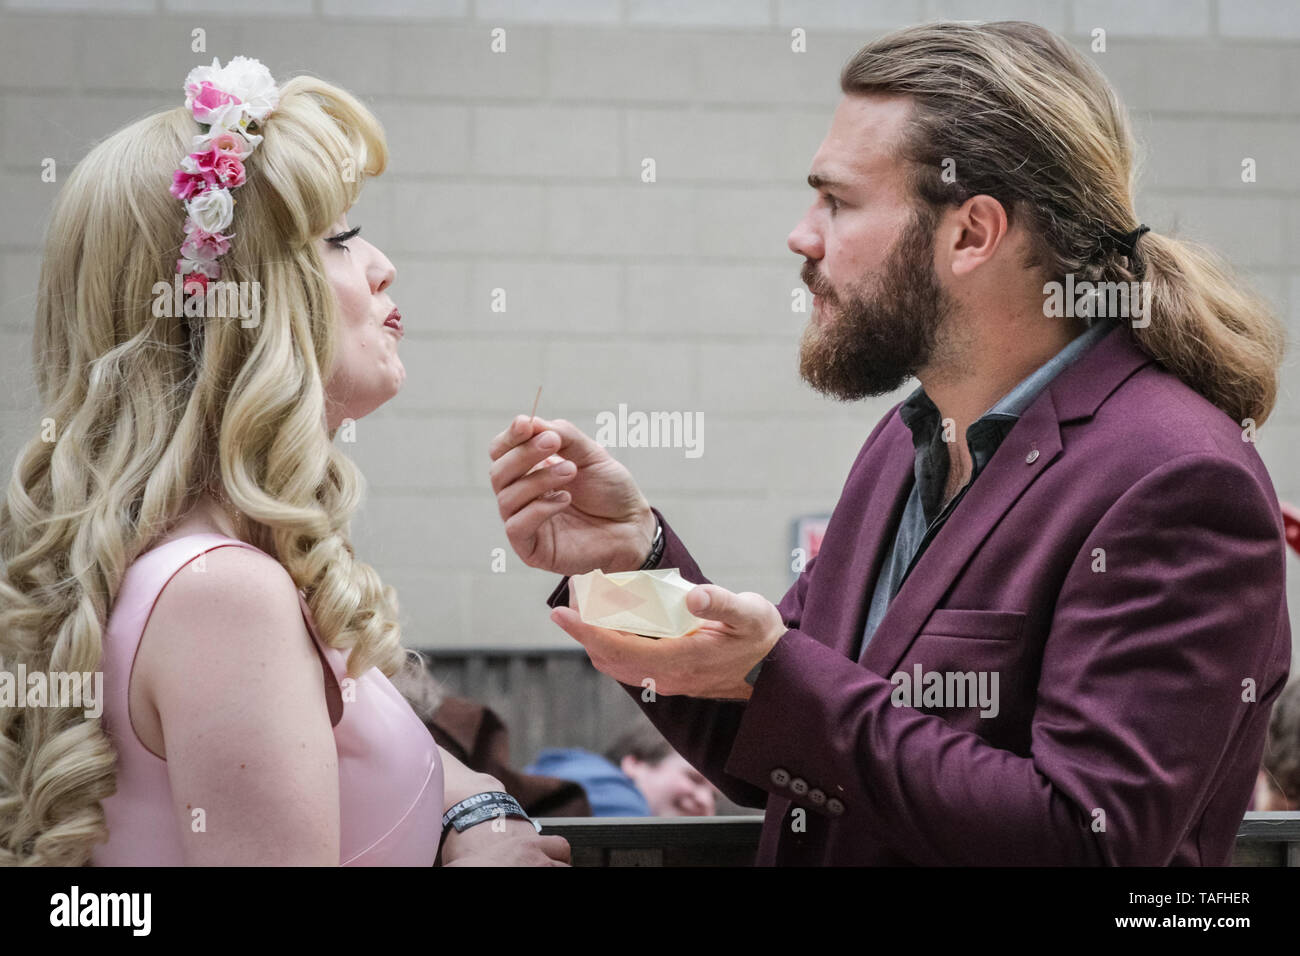 ExCel London, UK - 24th May 2019. Even a princess needs some food once in a while. Thousands of cosplayers, gamers and lovers of film and TV fantasy and sci fi in costumes come together on the opening day of MCM Comicon at ExCel London. Credit: Imageplotter/Alamy Live News Stock Photo